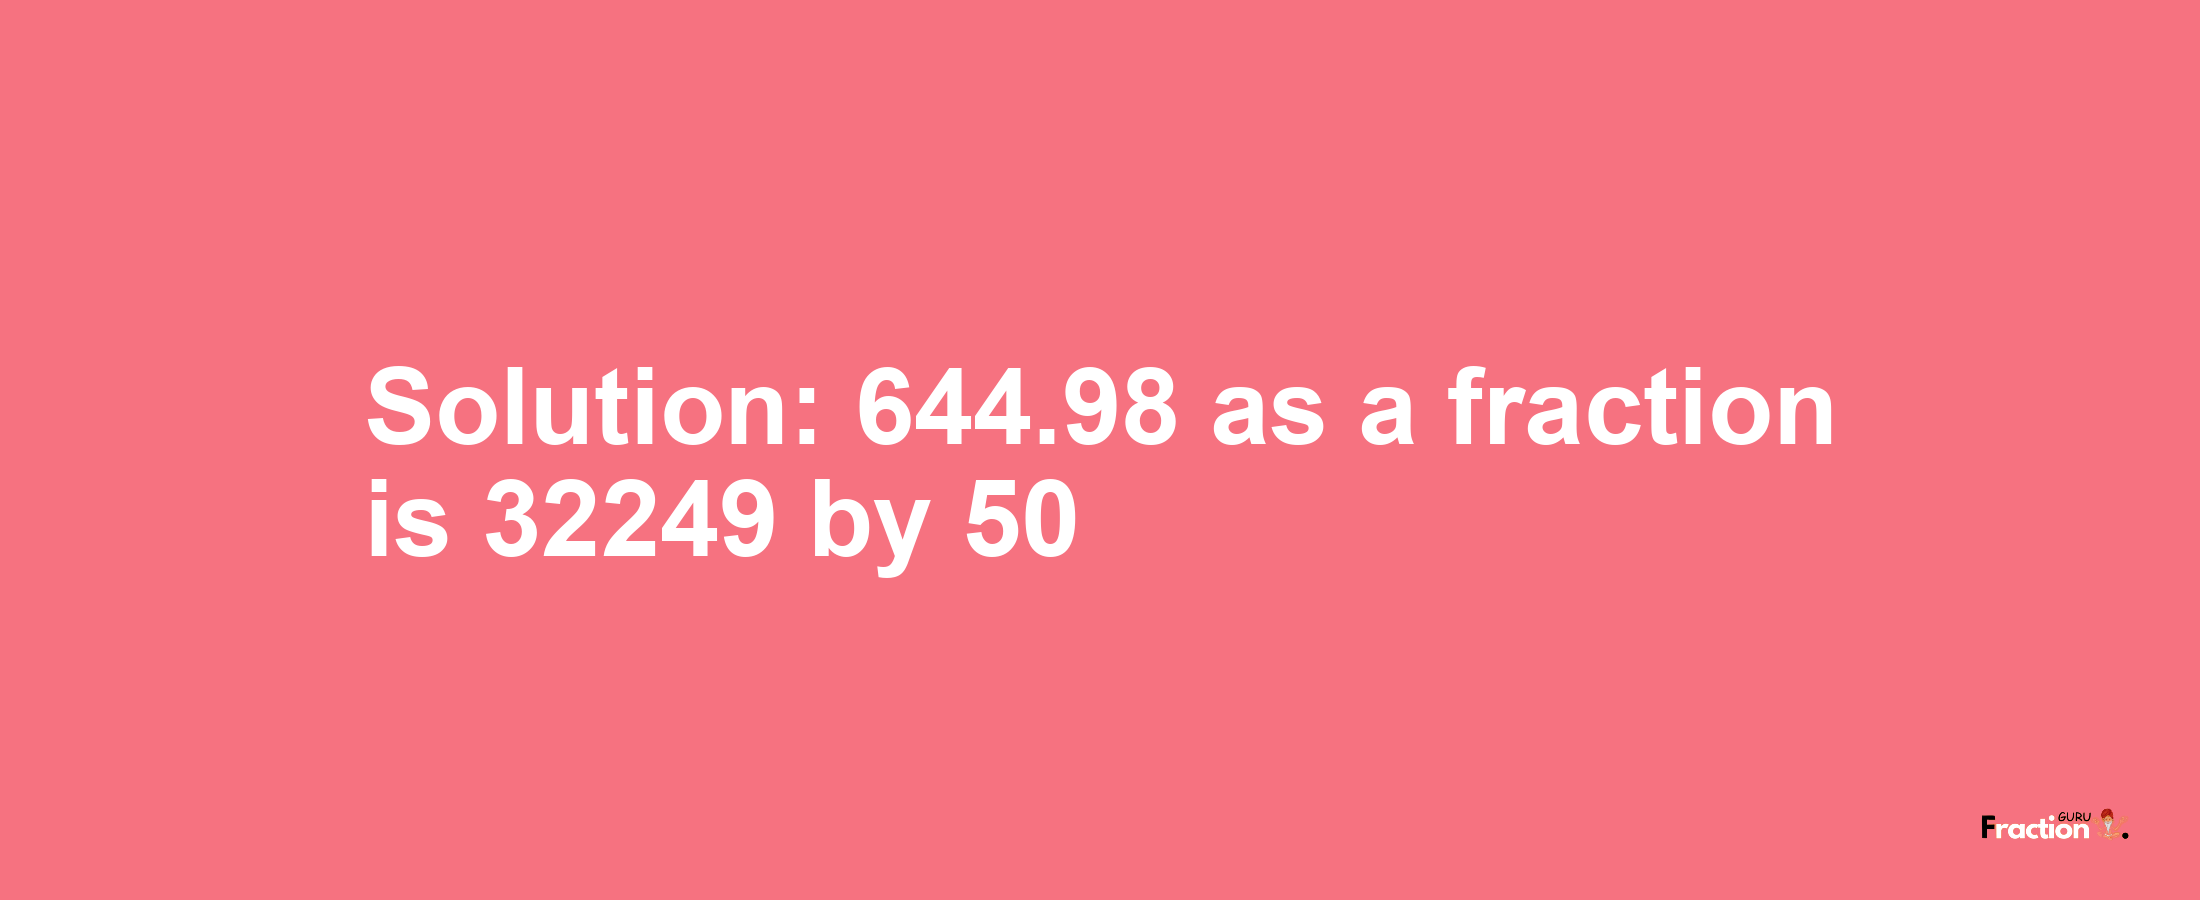 Solution:644.98 as a fraction is 32249/50